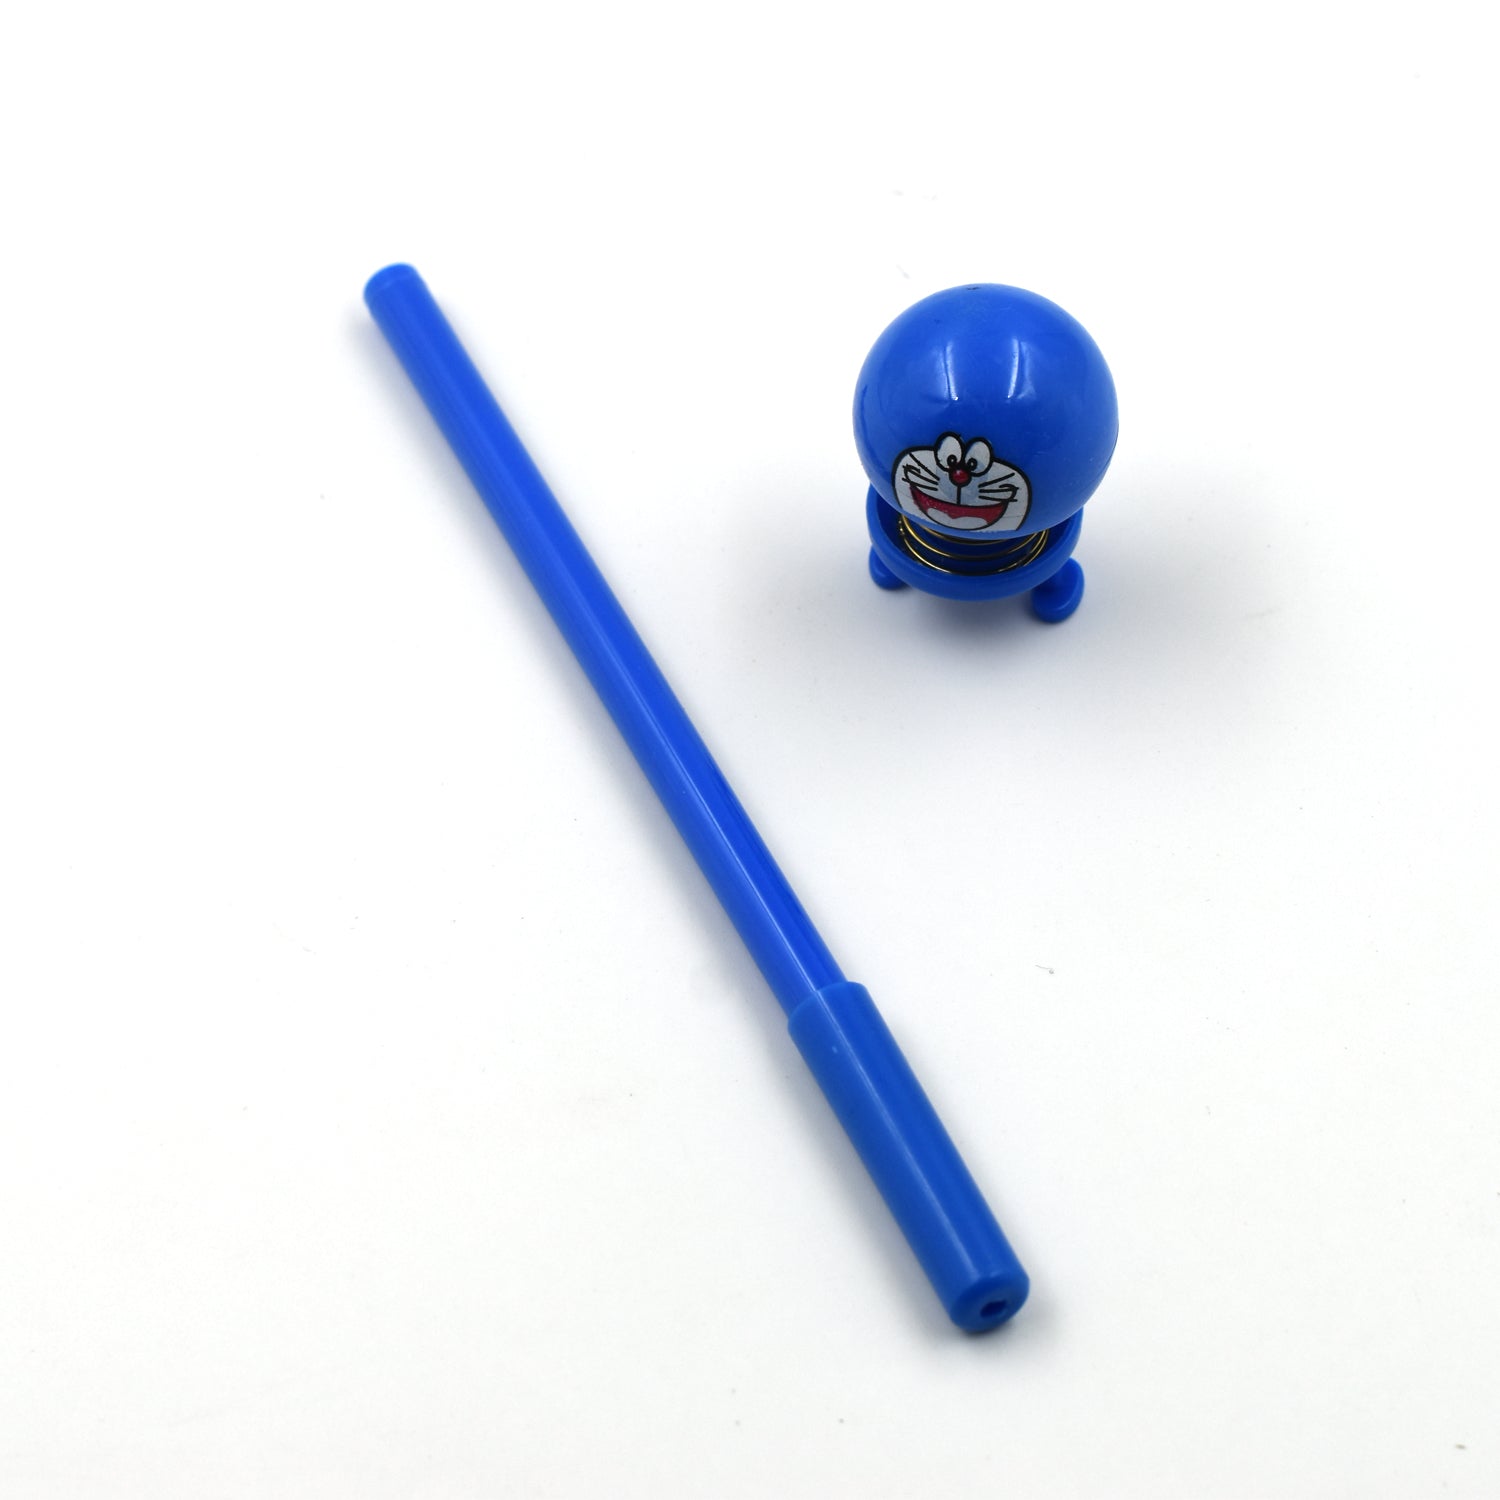 4771 Emoji Pen and Emoji Pencil Used by kids for writing and playing purposes etc.